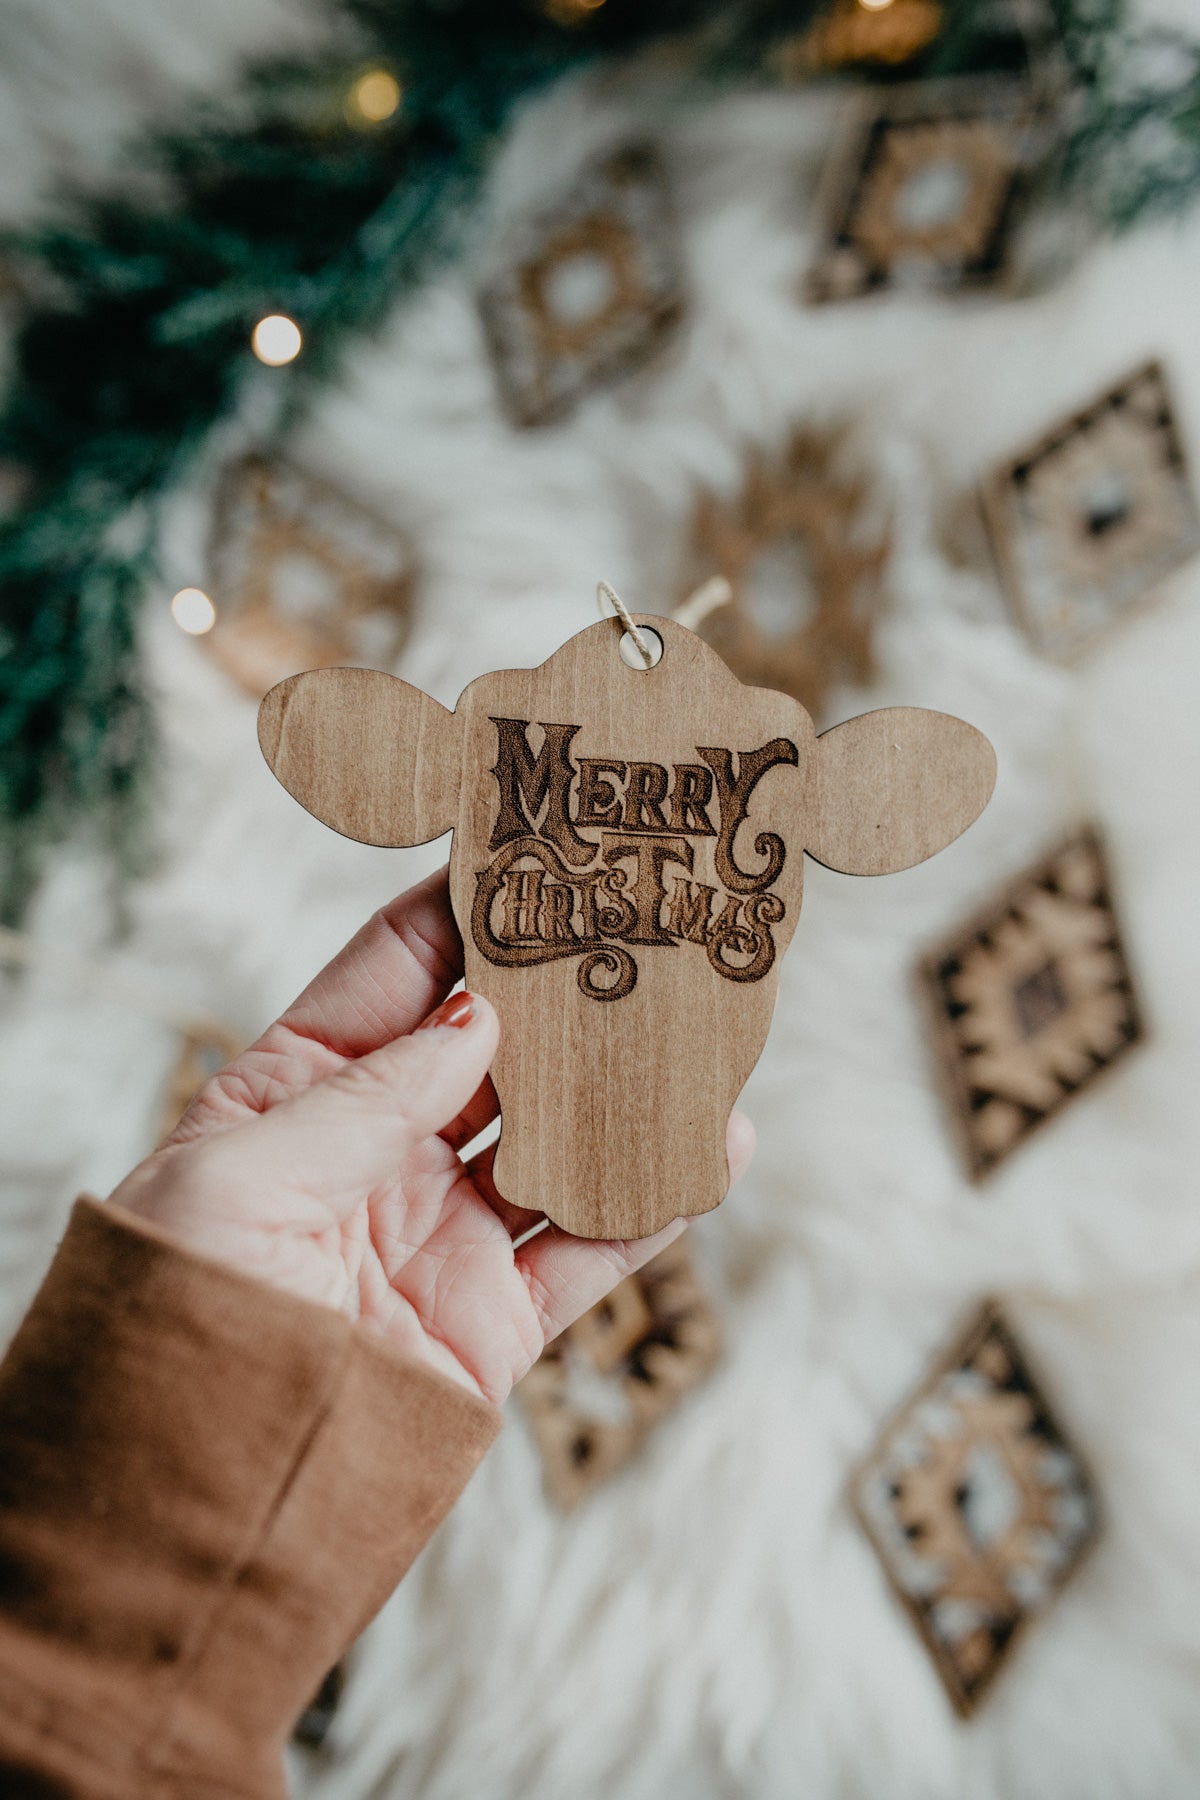 "Merry Christmas" Wooden Cow Ornament